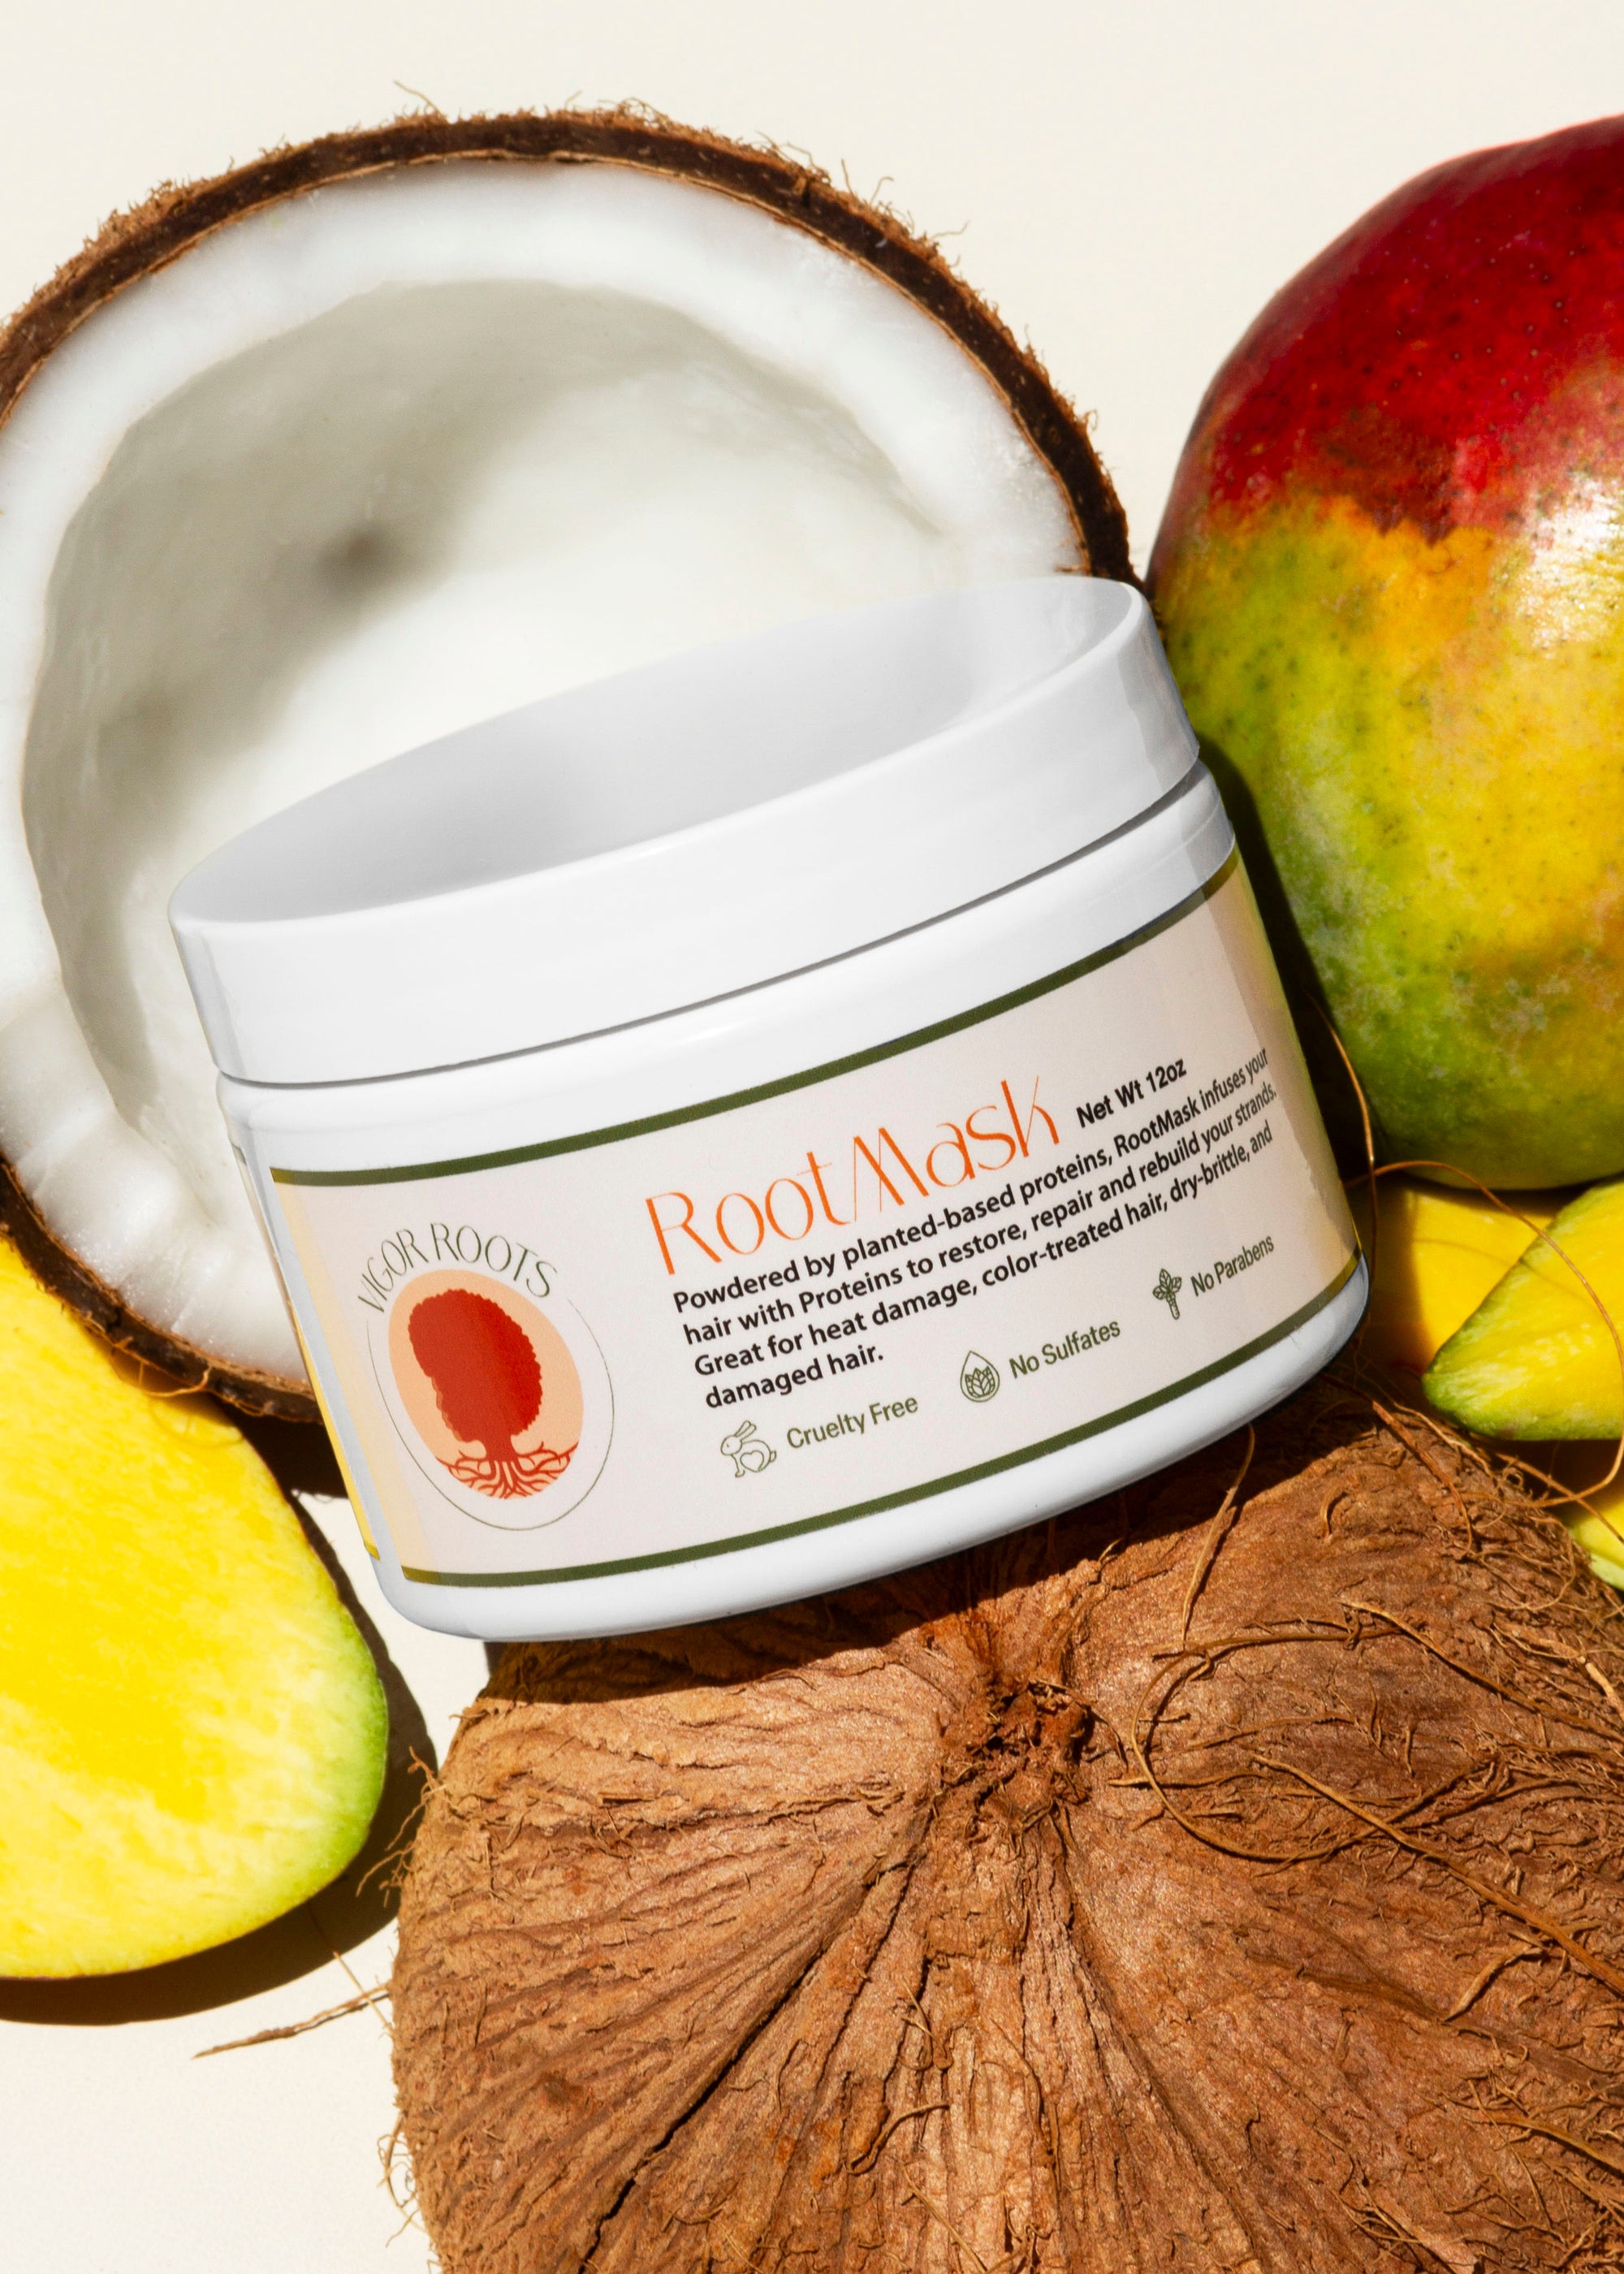 A jar of RootMask- Vigor Roots' reparative hair mask is posed with fresh coconut & mango- some of the food-grade, all natural ingredients featured in the luxurious formula.